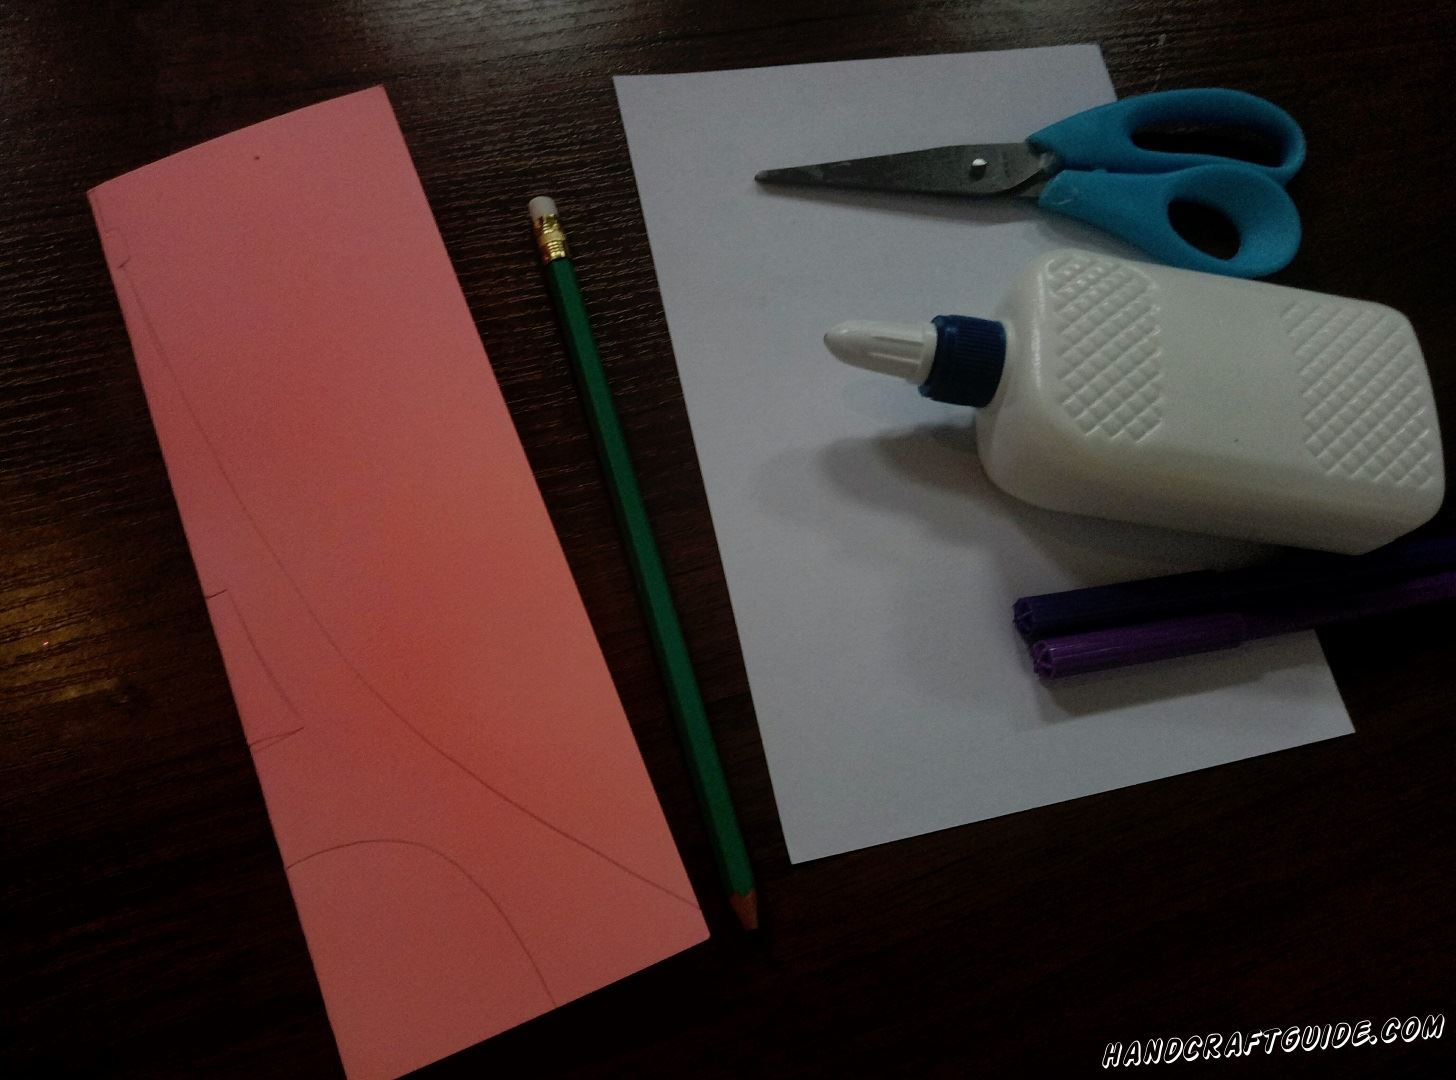 At the very beginning take a pink sheet of paper and vertically fold it in half . Then draw a half of the tower so that when you cut it out, you'll get a symmetrical figure.